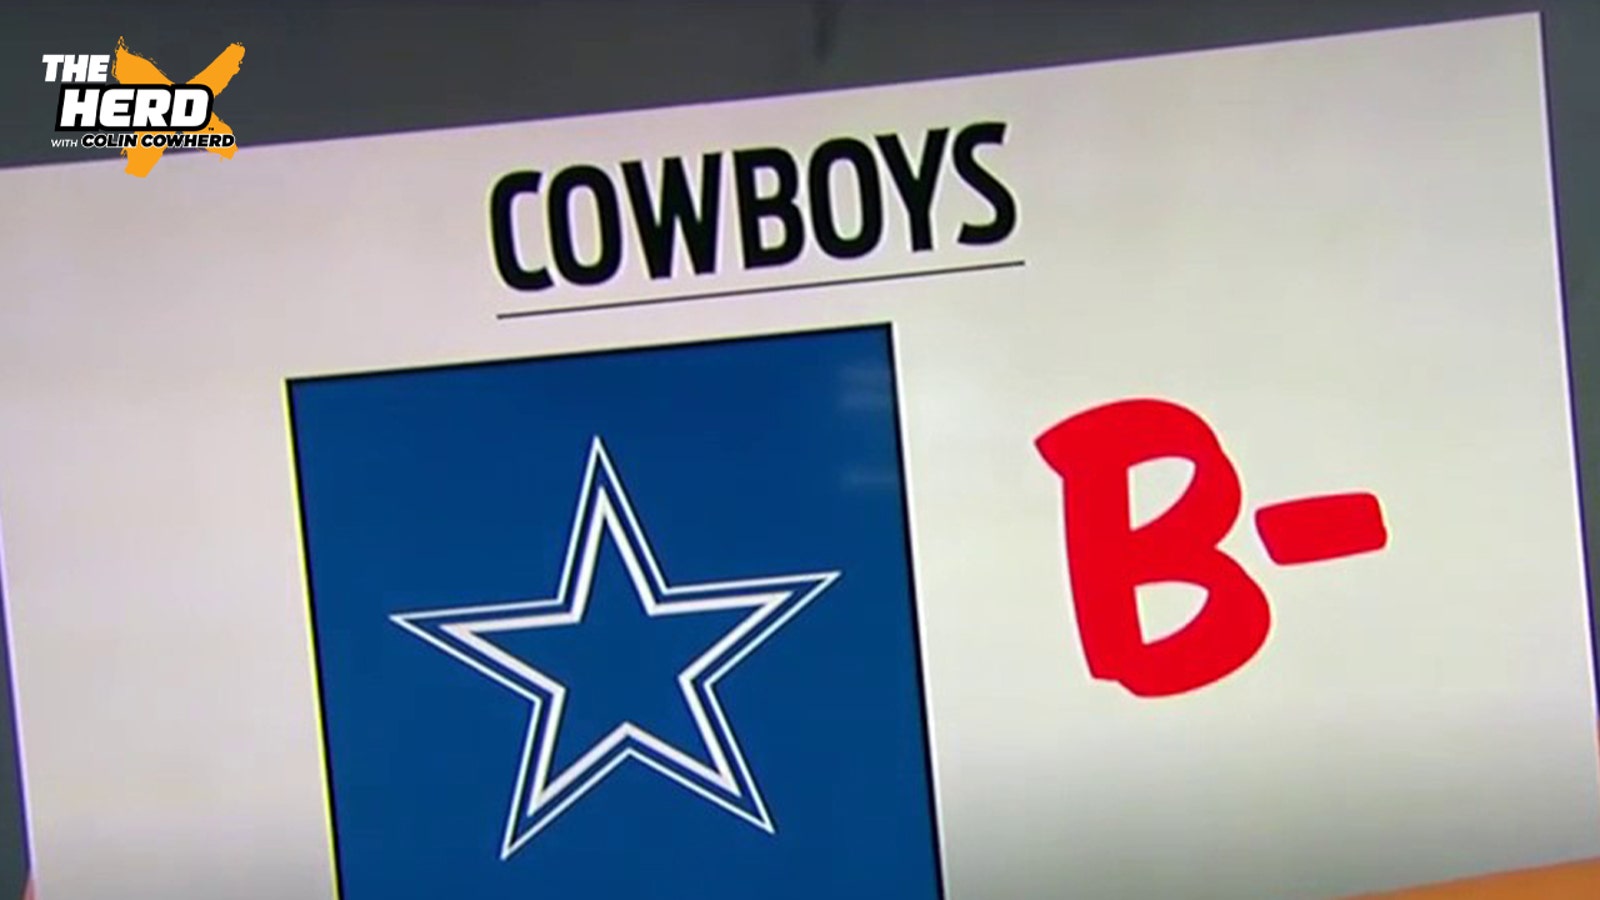 Colin Cowherd breaks down the divisional round ratings for each team